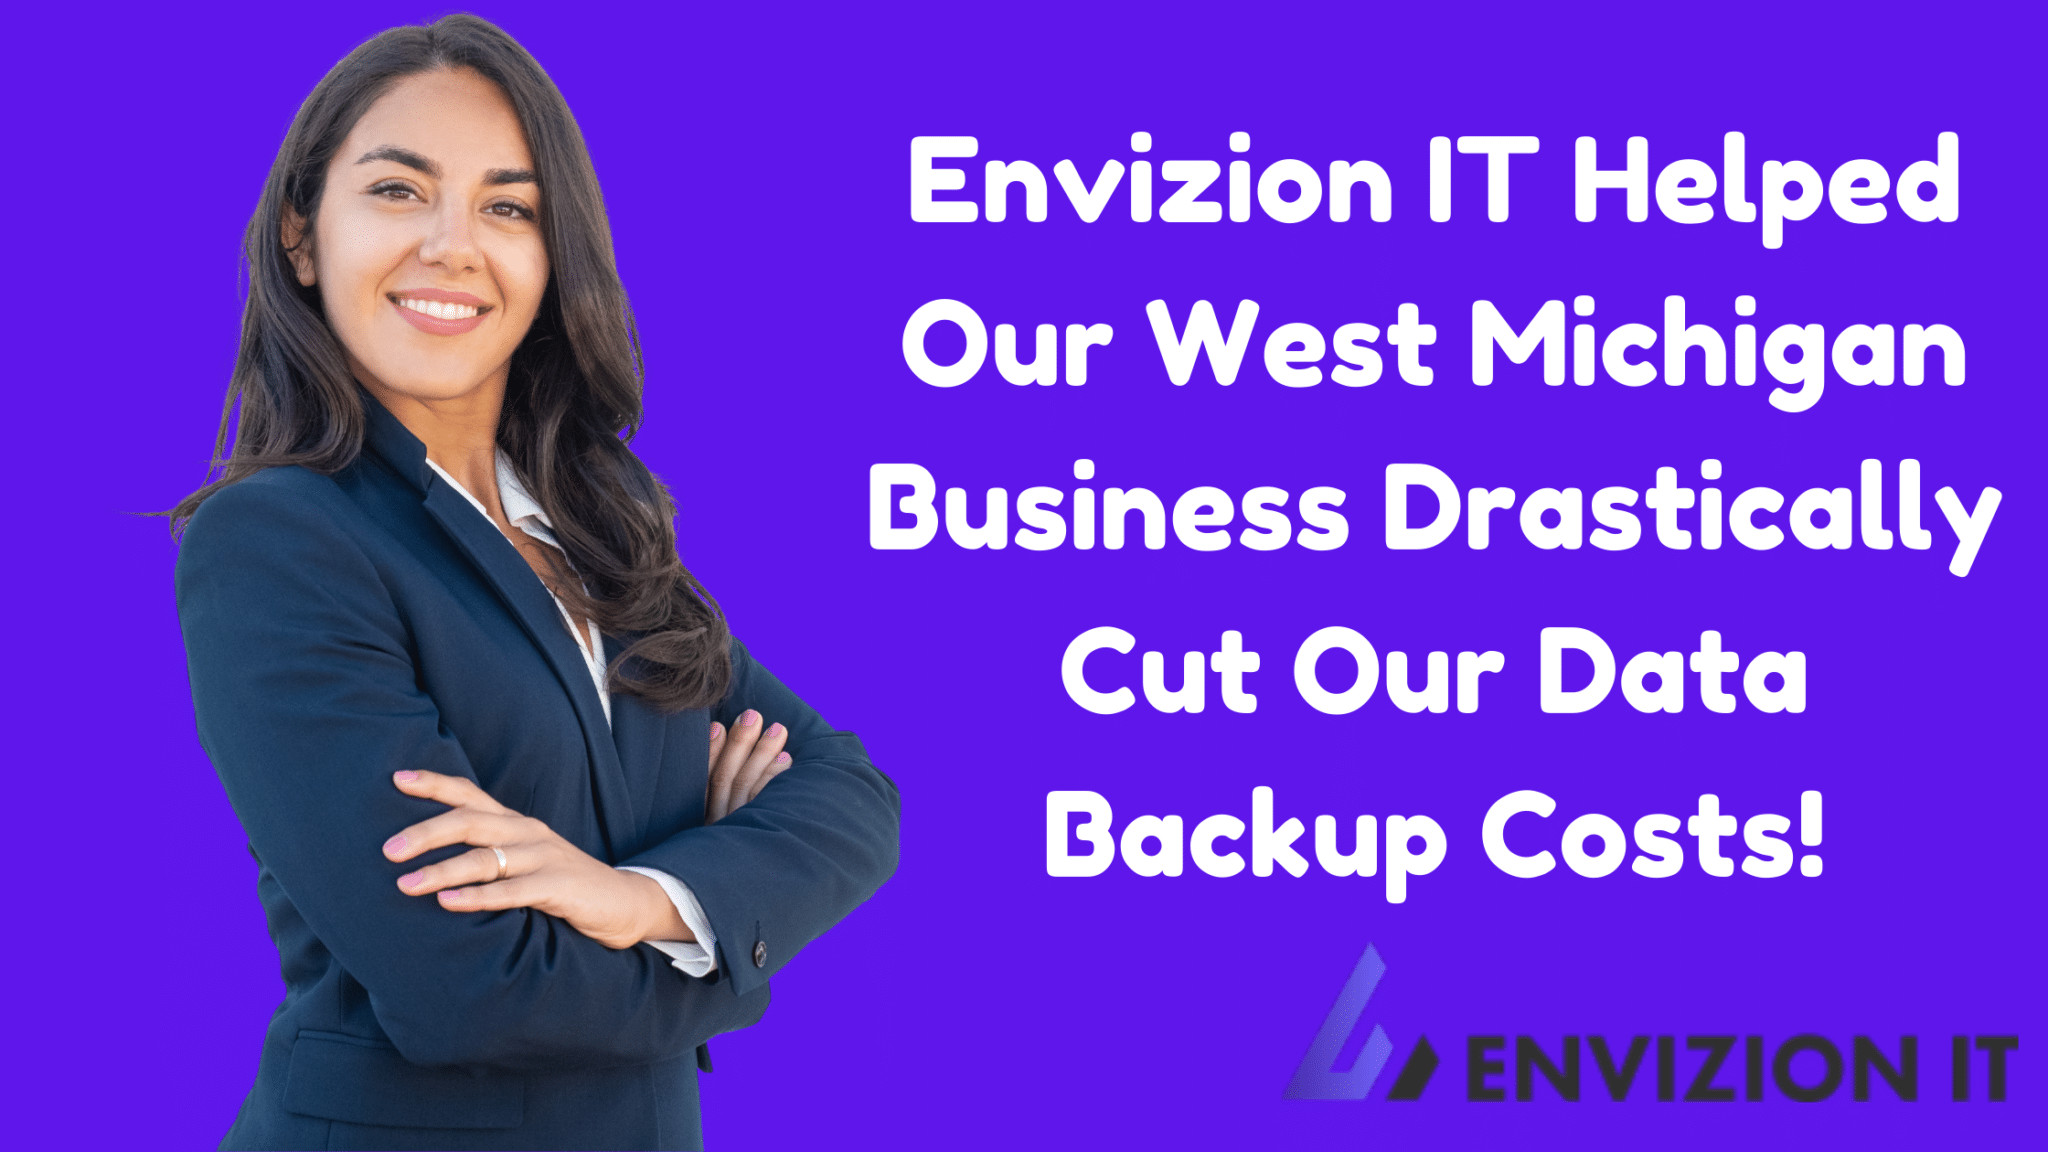 Envizion IT Helped Our West Michigan Business Drastically Cut Our Data Backup Costs!